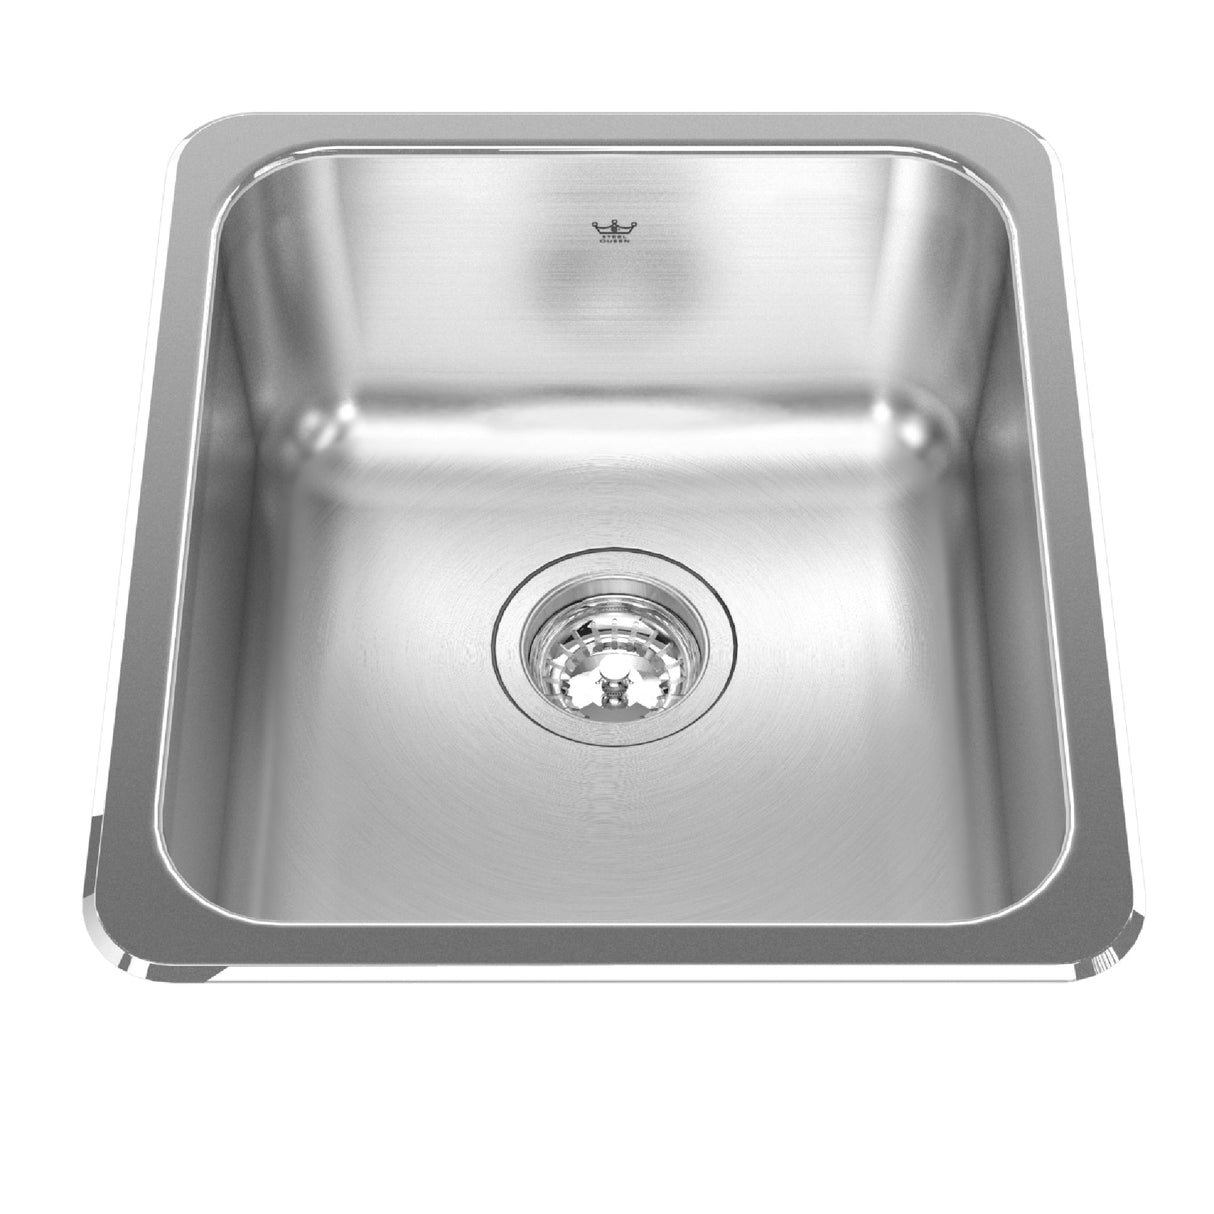 KINDRED QSA1816-8N Steel Queen 16.13-in LR x 18.13-in FB x 8-in DP Drop In Single Bowl Stainless Steel Kitchen Sink In Satin Finished Bowl with Mirror Finished Rim